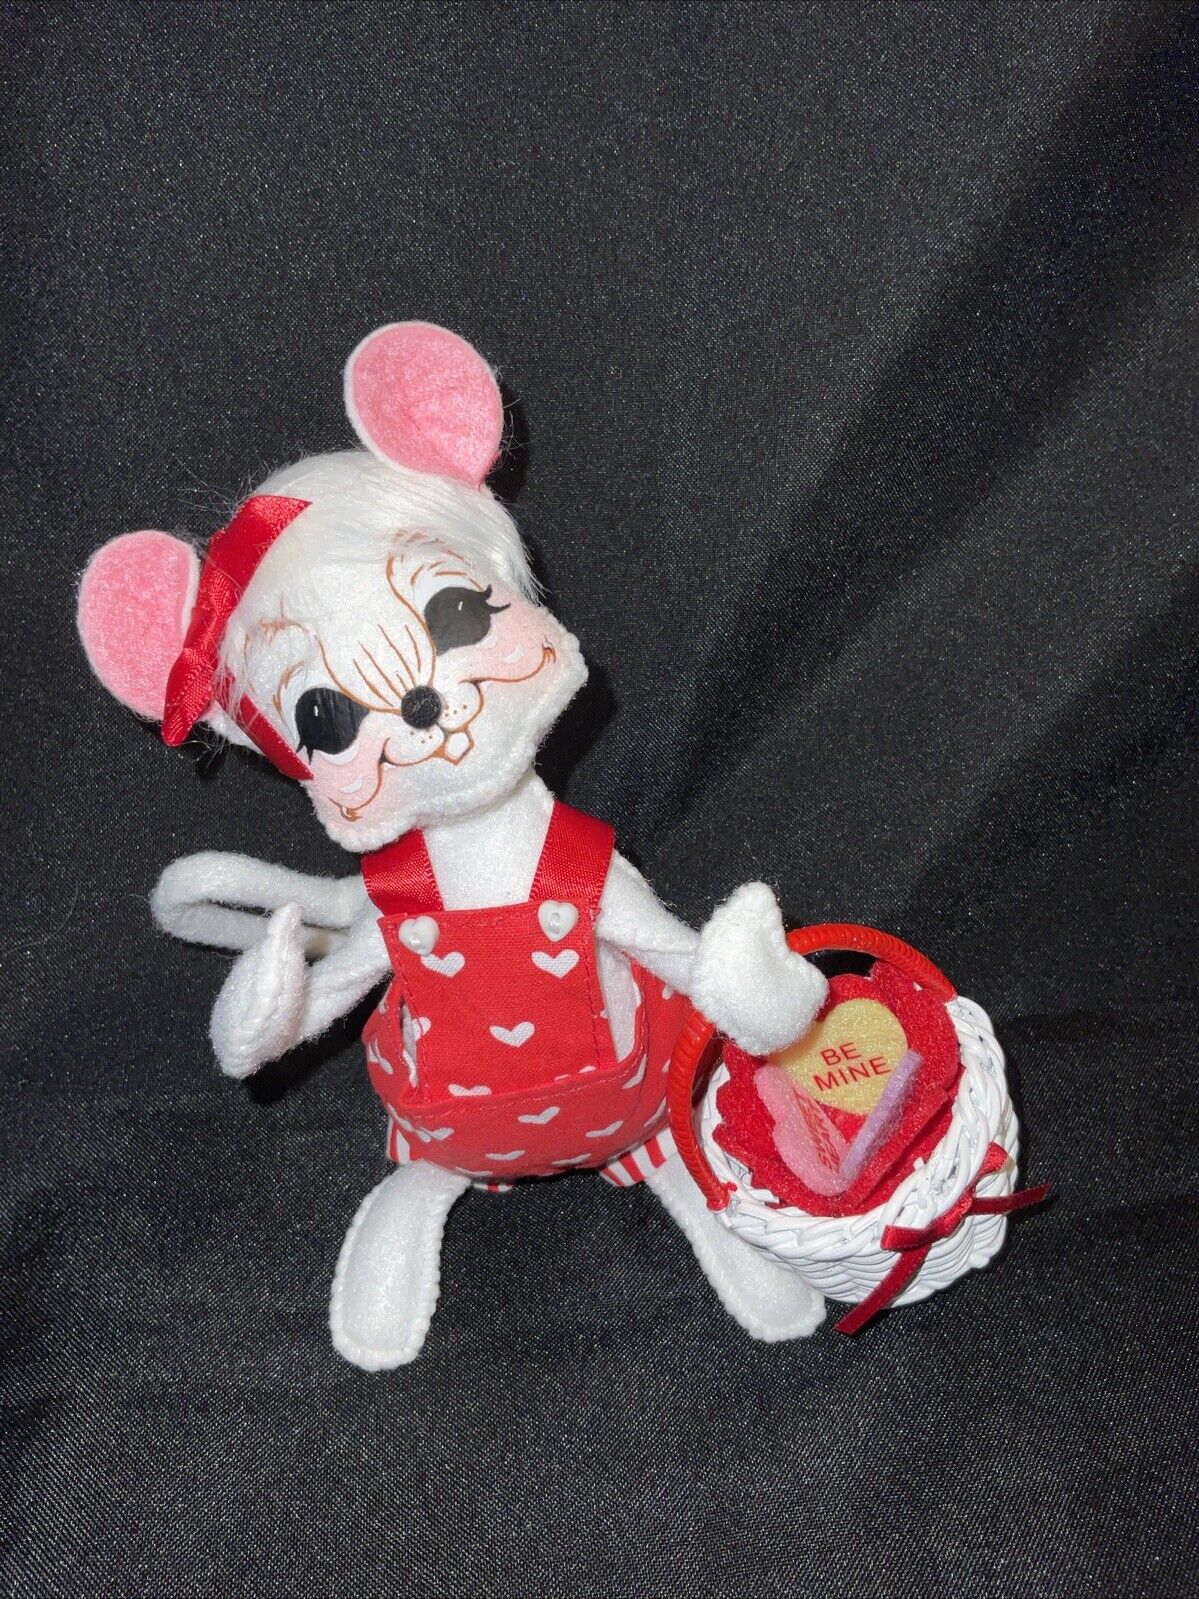 Annalee 2019 Valentine Mrs. Mouse With Love Heart Candies In A Basket